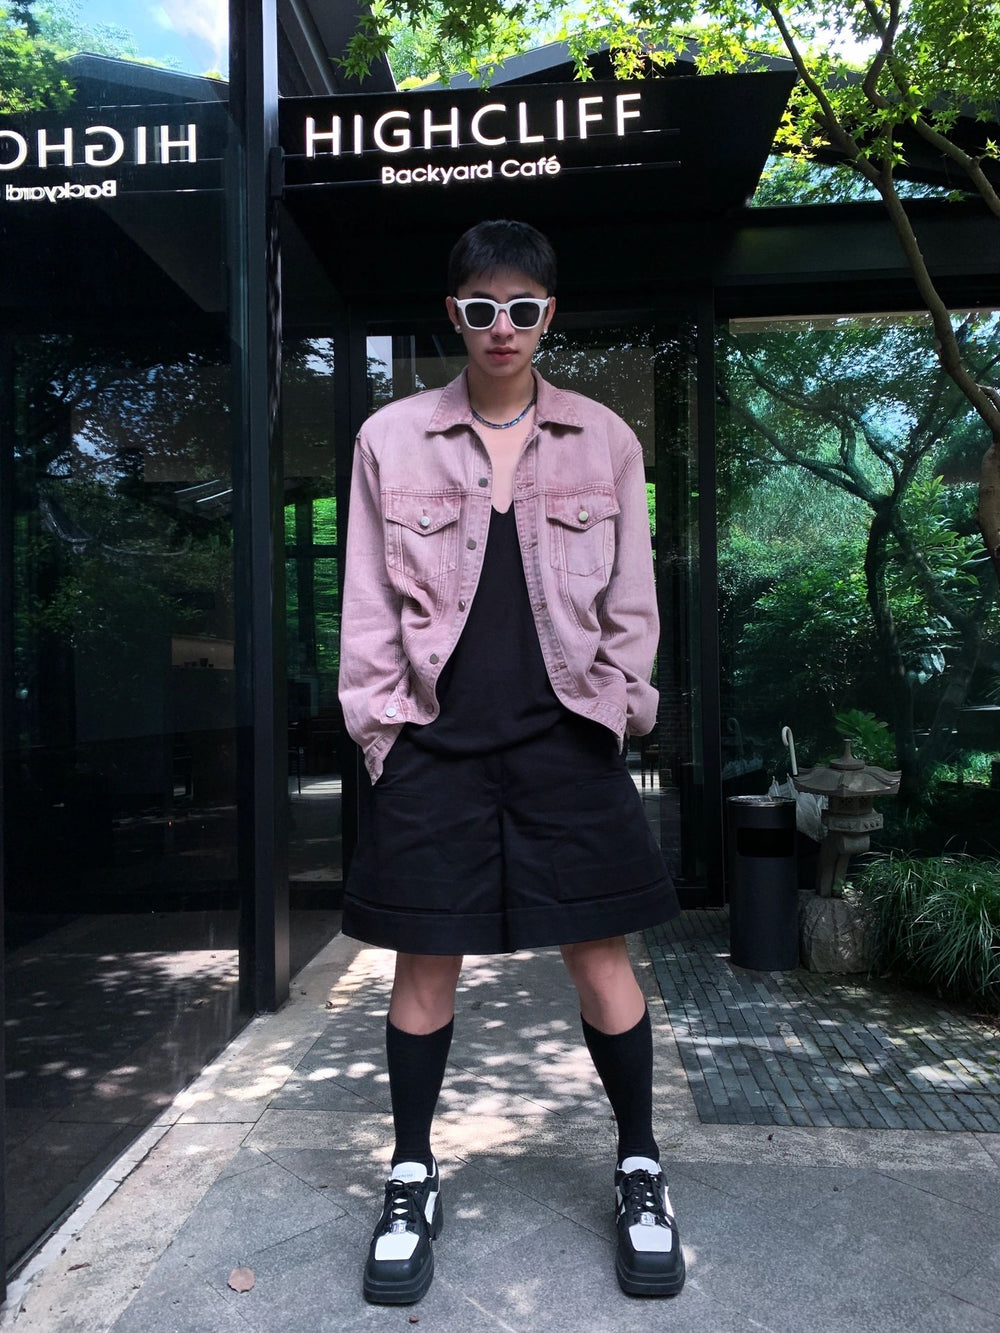 Witness the epitome of sartorial elegance as a debonair man effortlessly rocks a pink jacket and a sleek black skirt, showcasing his impeccable taste wearing his Korean fashion sunglasses.